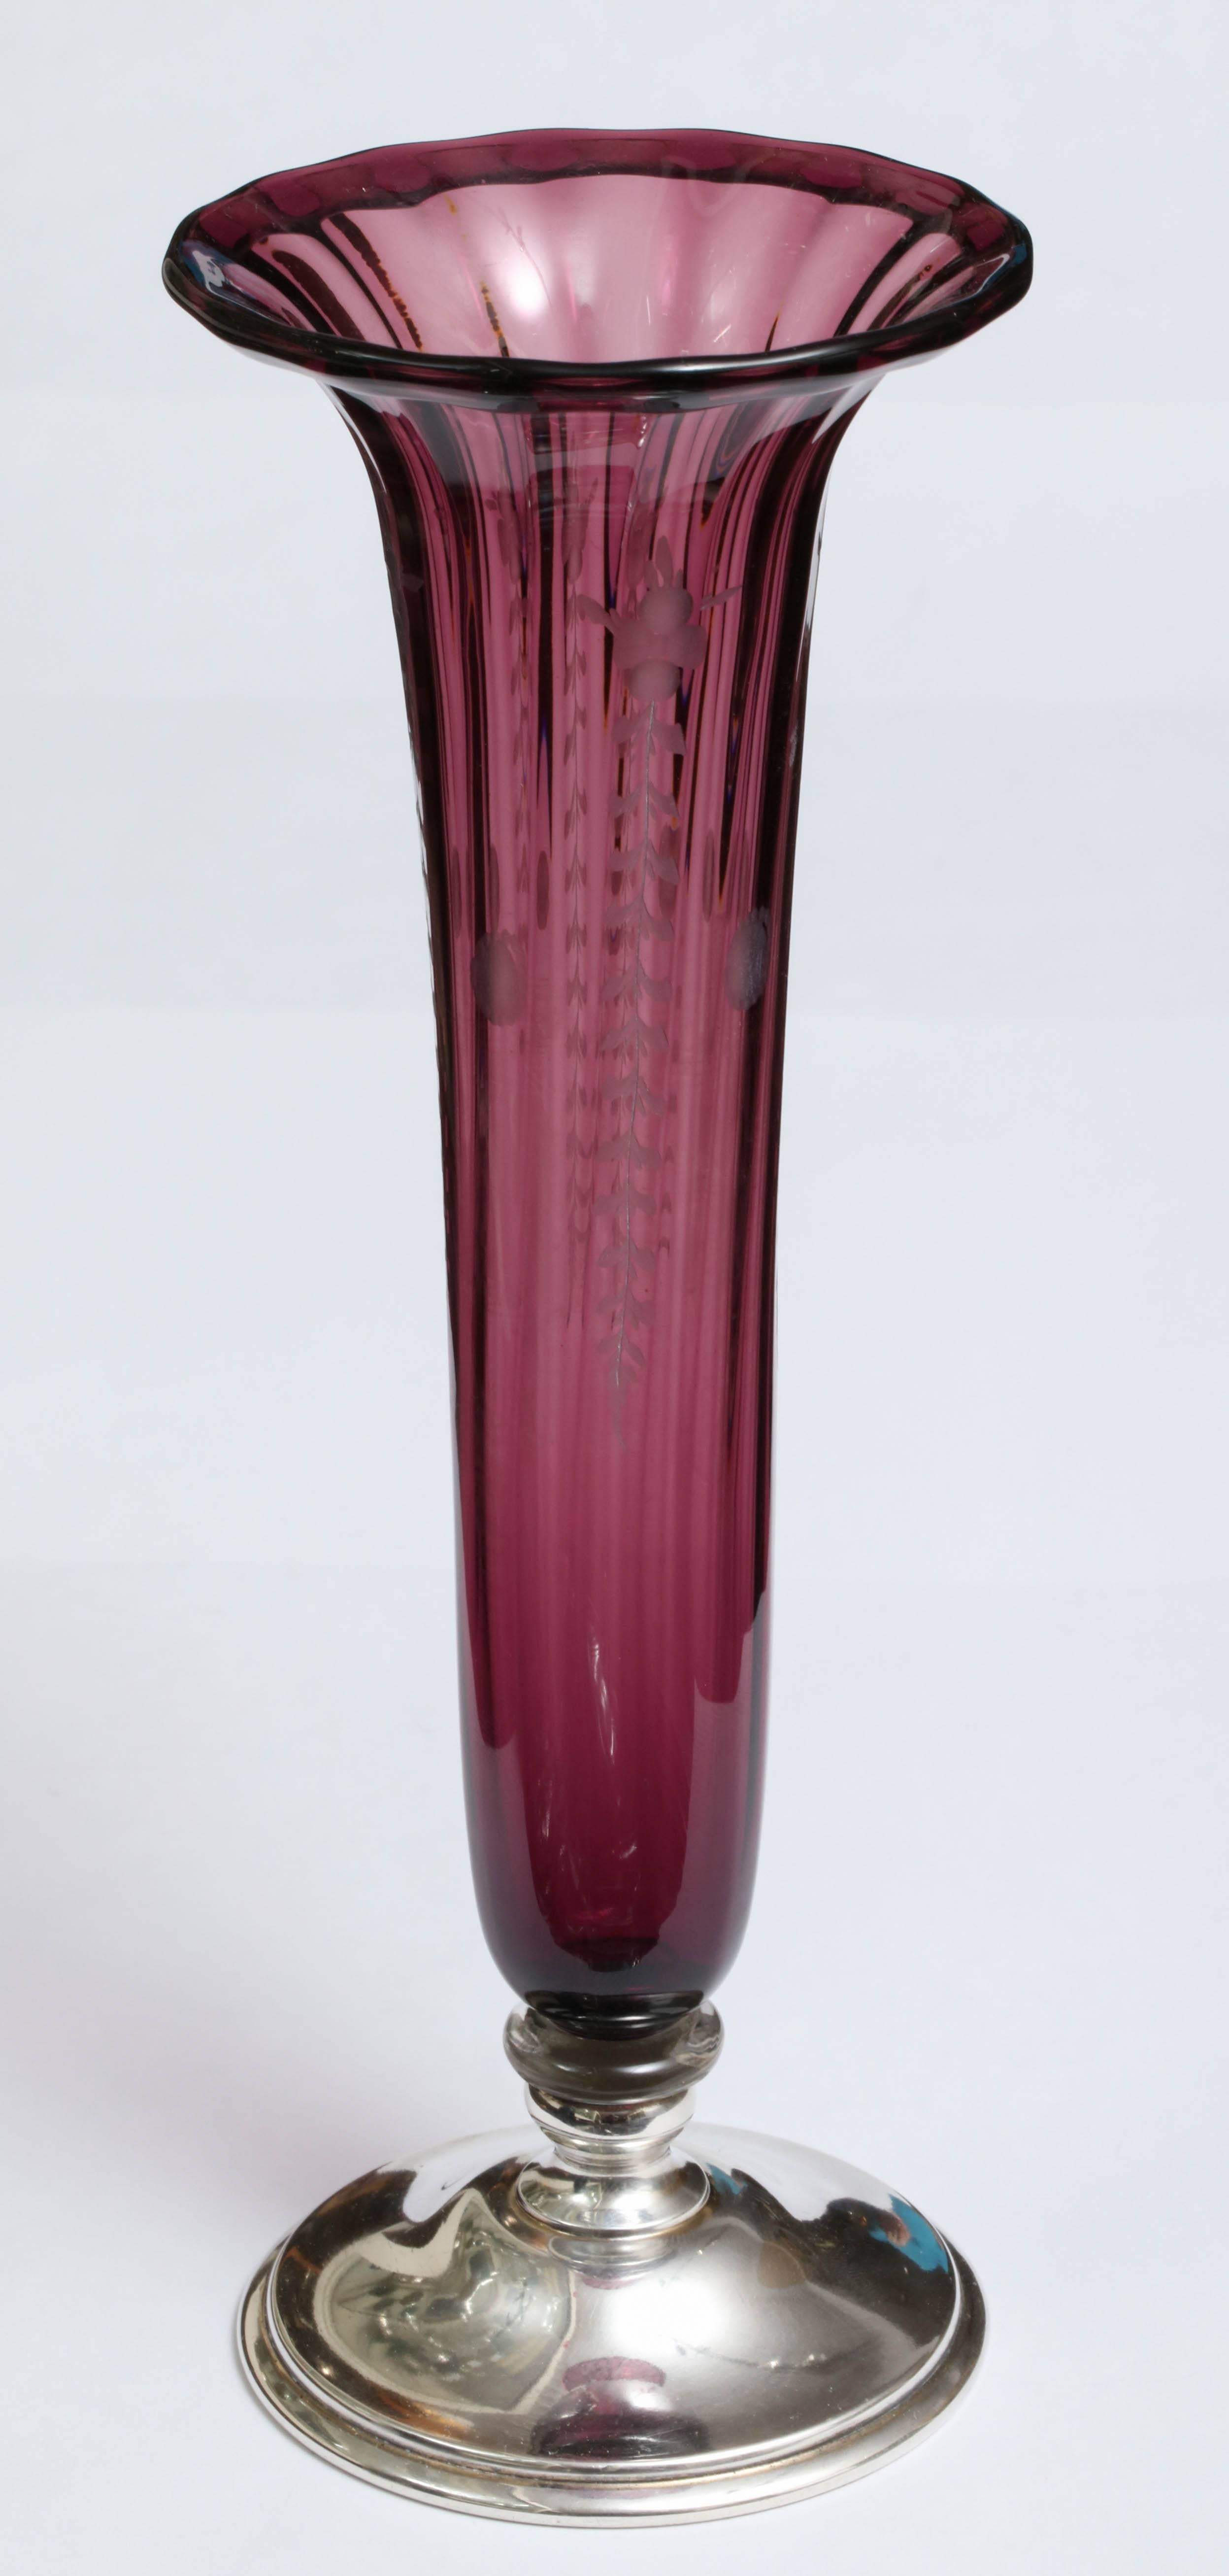 Unusual,sterling silver-mounted, etched, purple/wine colored crystal vase, T. G. Hawkes and Company, New York, circa 1905. Crystal is rippled, and has lovely, delicate, clear hanging garlands etched into it. 9 inches high x 3 1/8 inches diameter